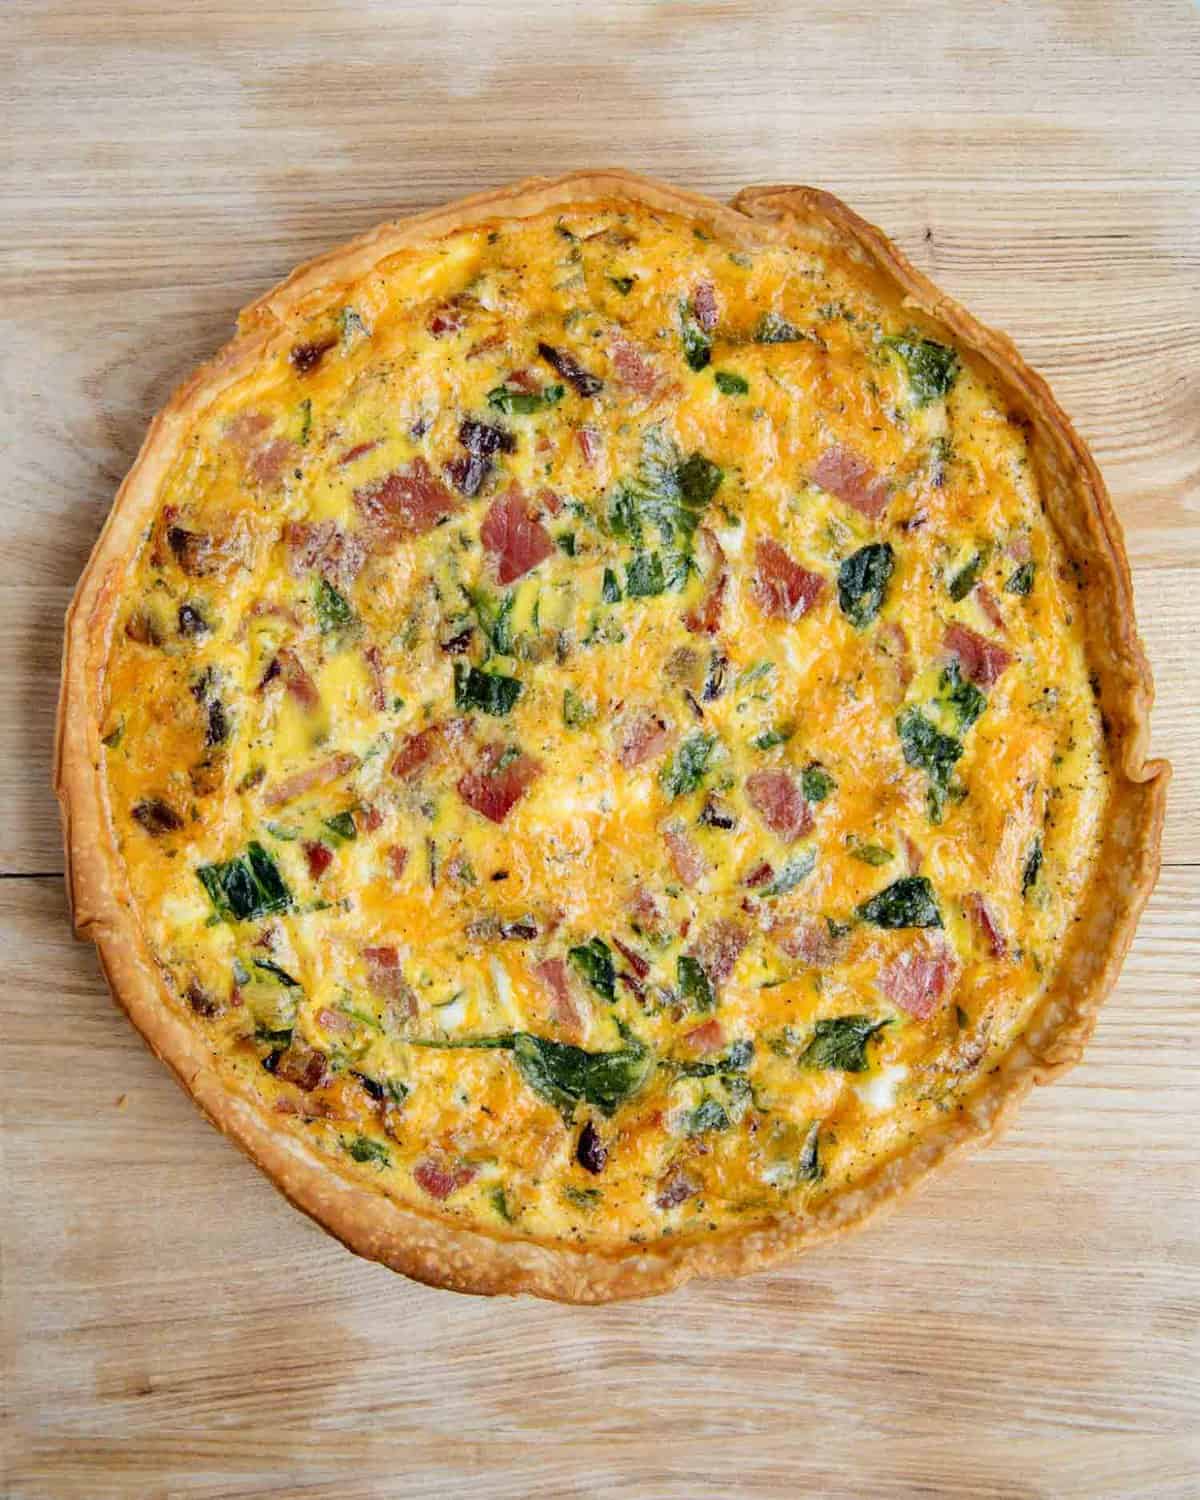 Baked ham and cheese quiche on a wood cutting board.